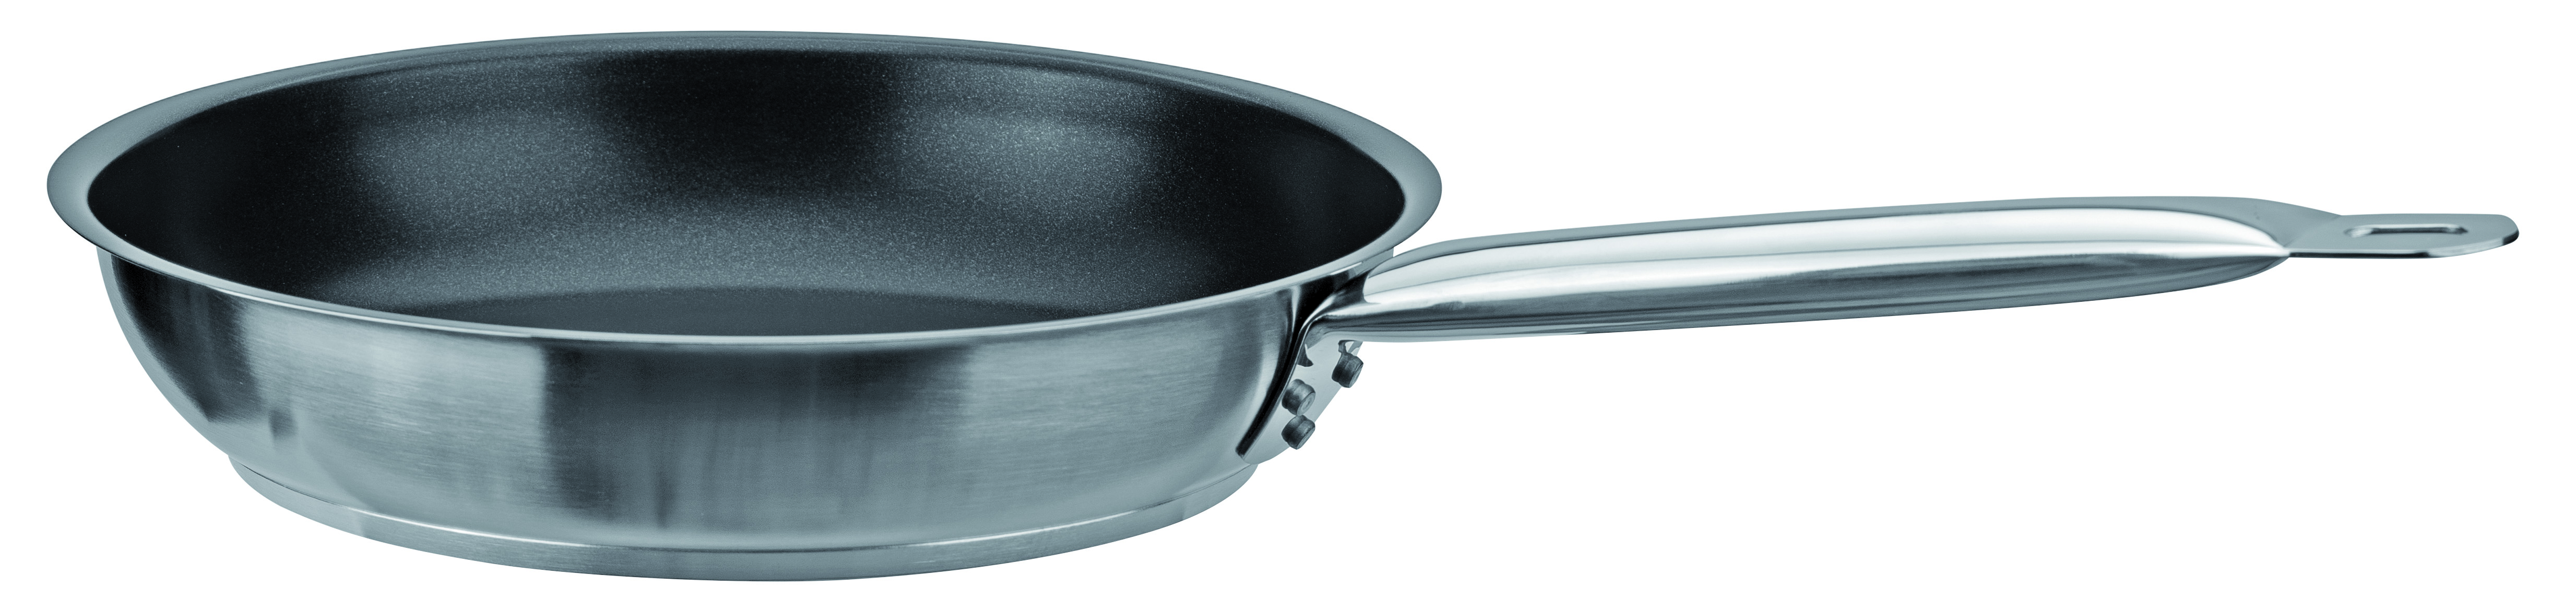 PIAZZA Stainless Steel Frying pan with non-stick coat- Chef Collection- diametre 20Cm